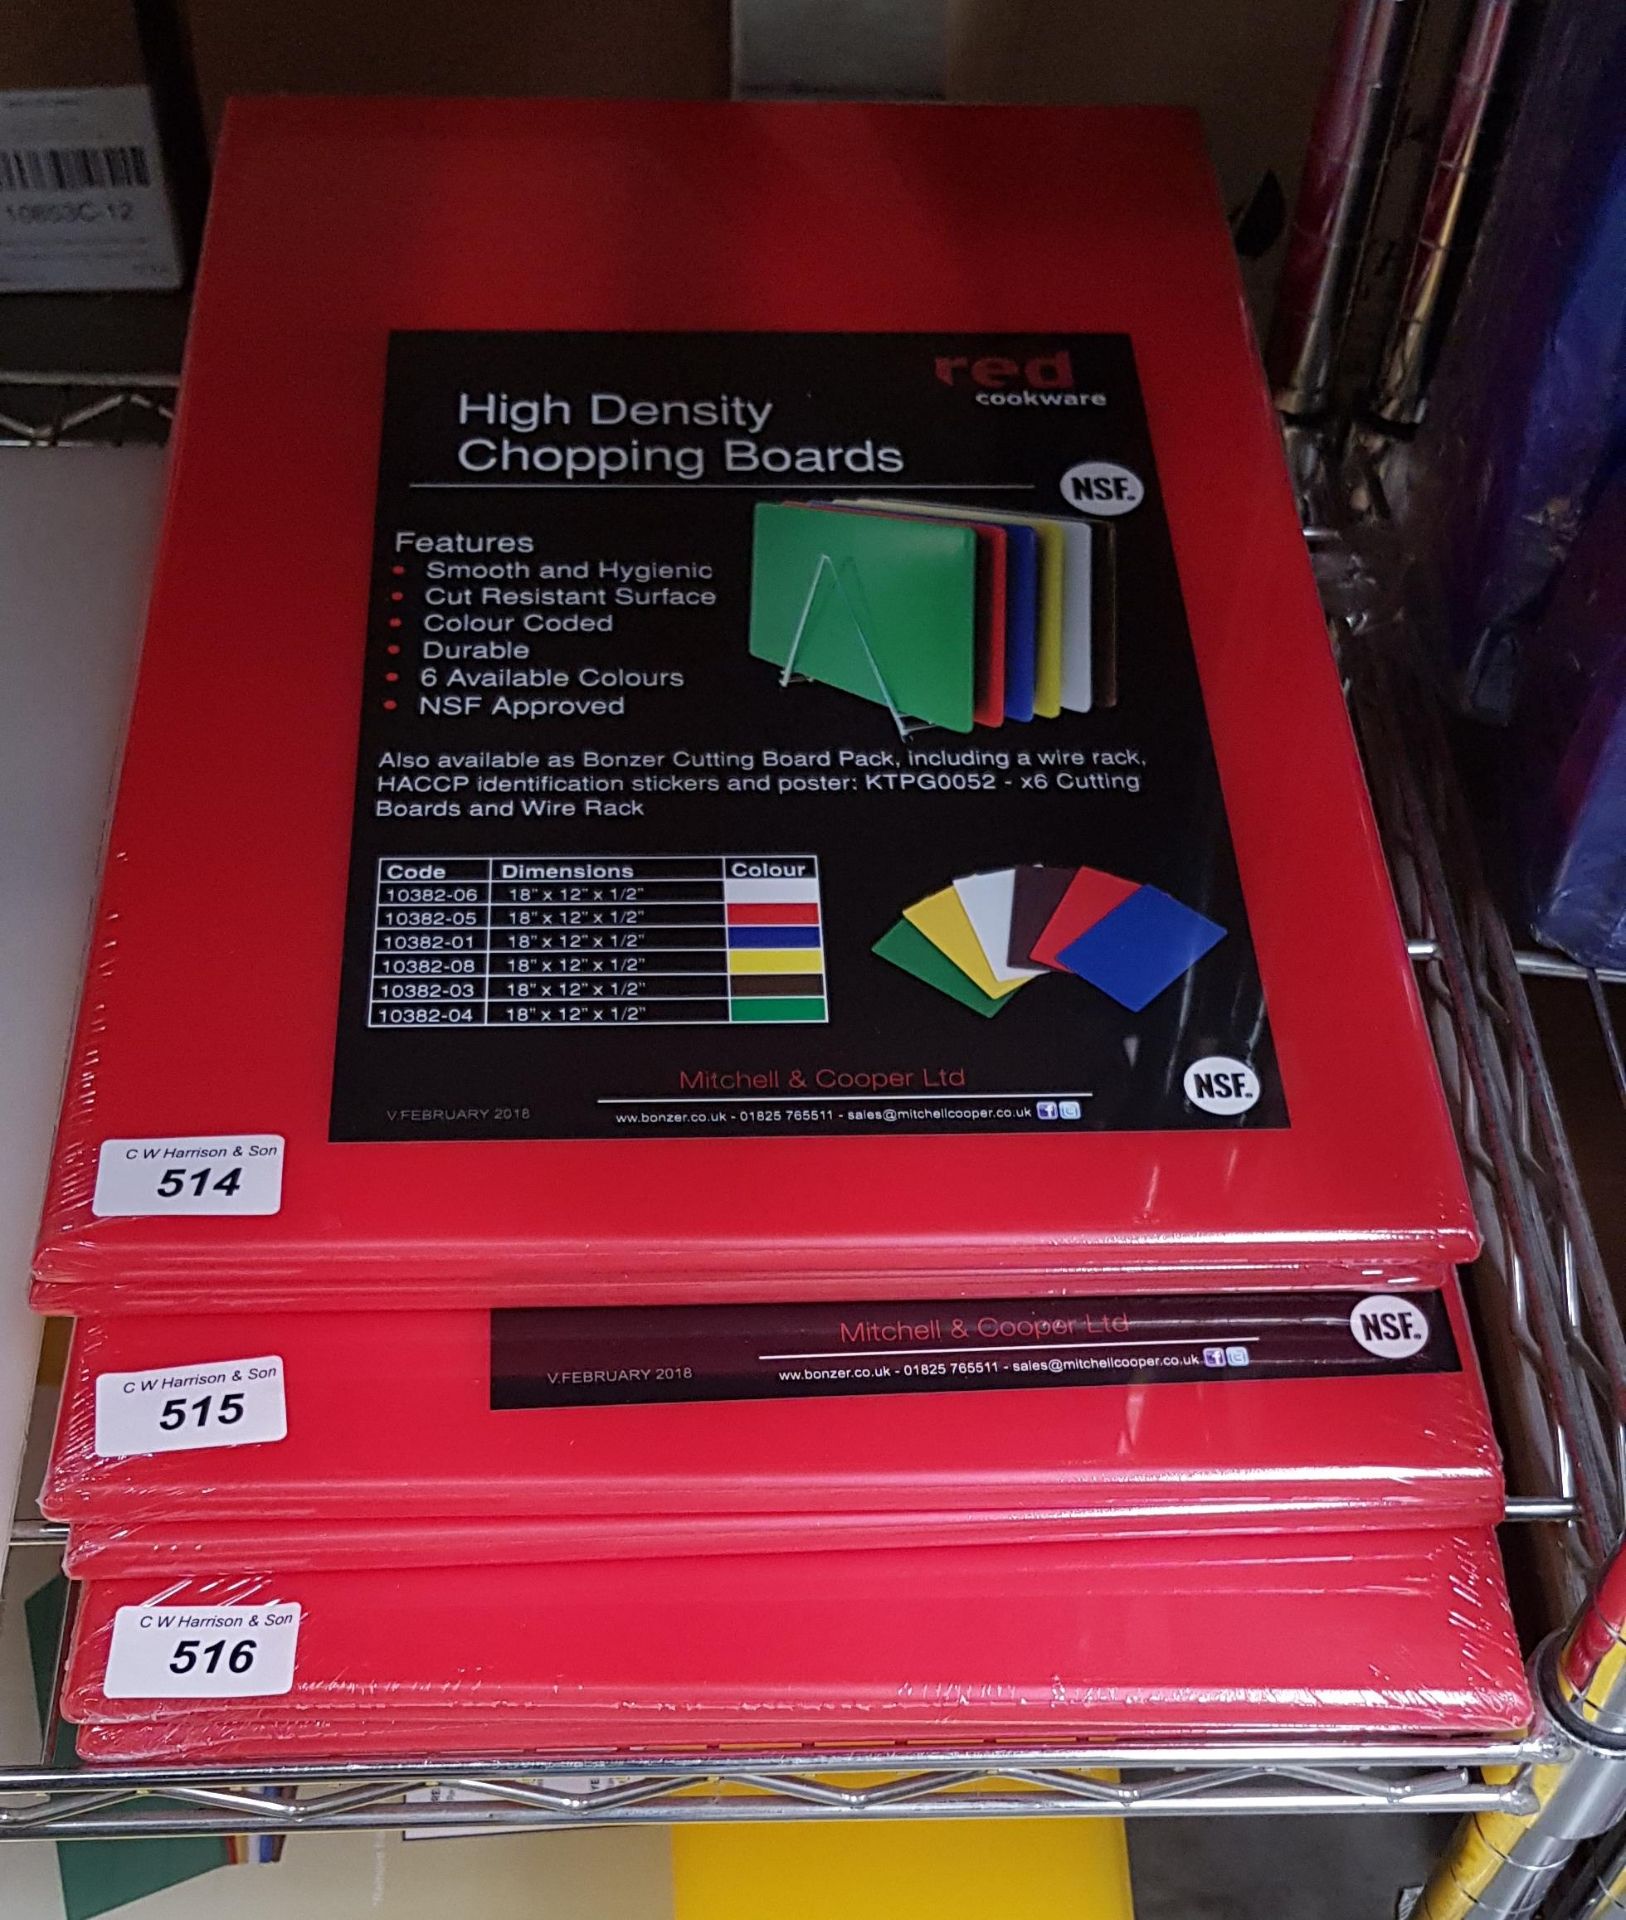 2 X MED SIZED HIGH DENSITY PRO CHOPPING BOARDS RRP £180